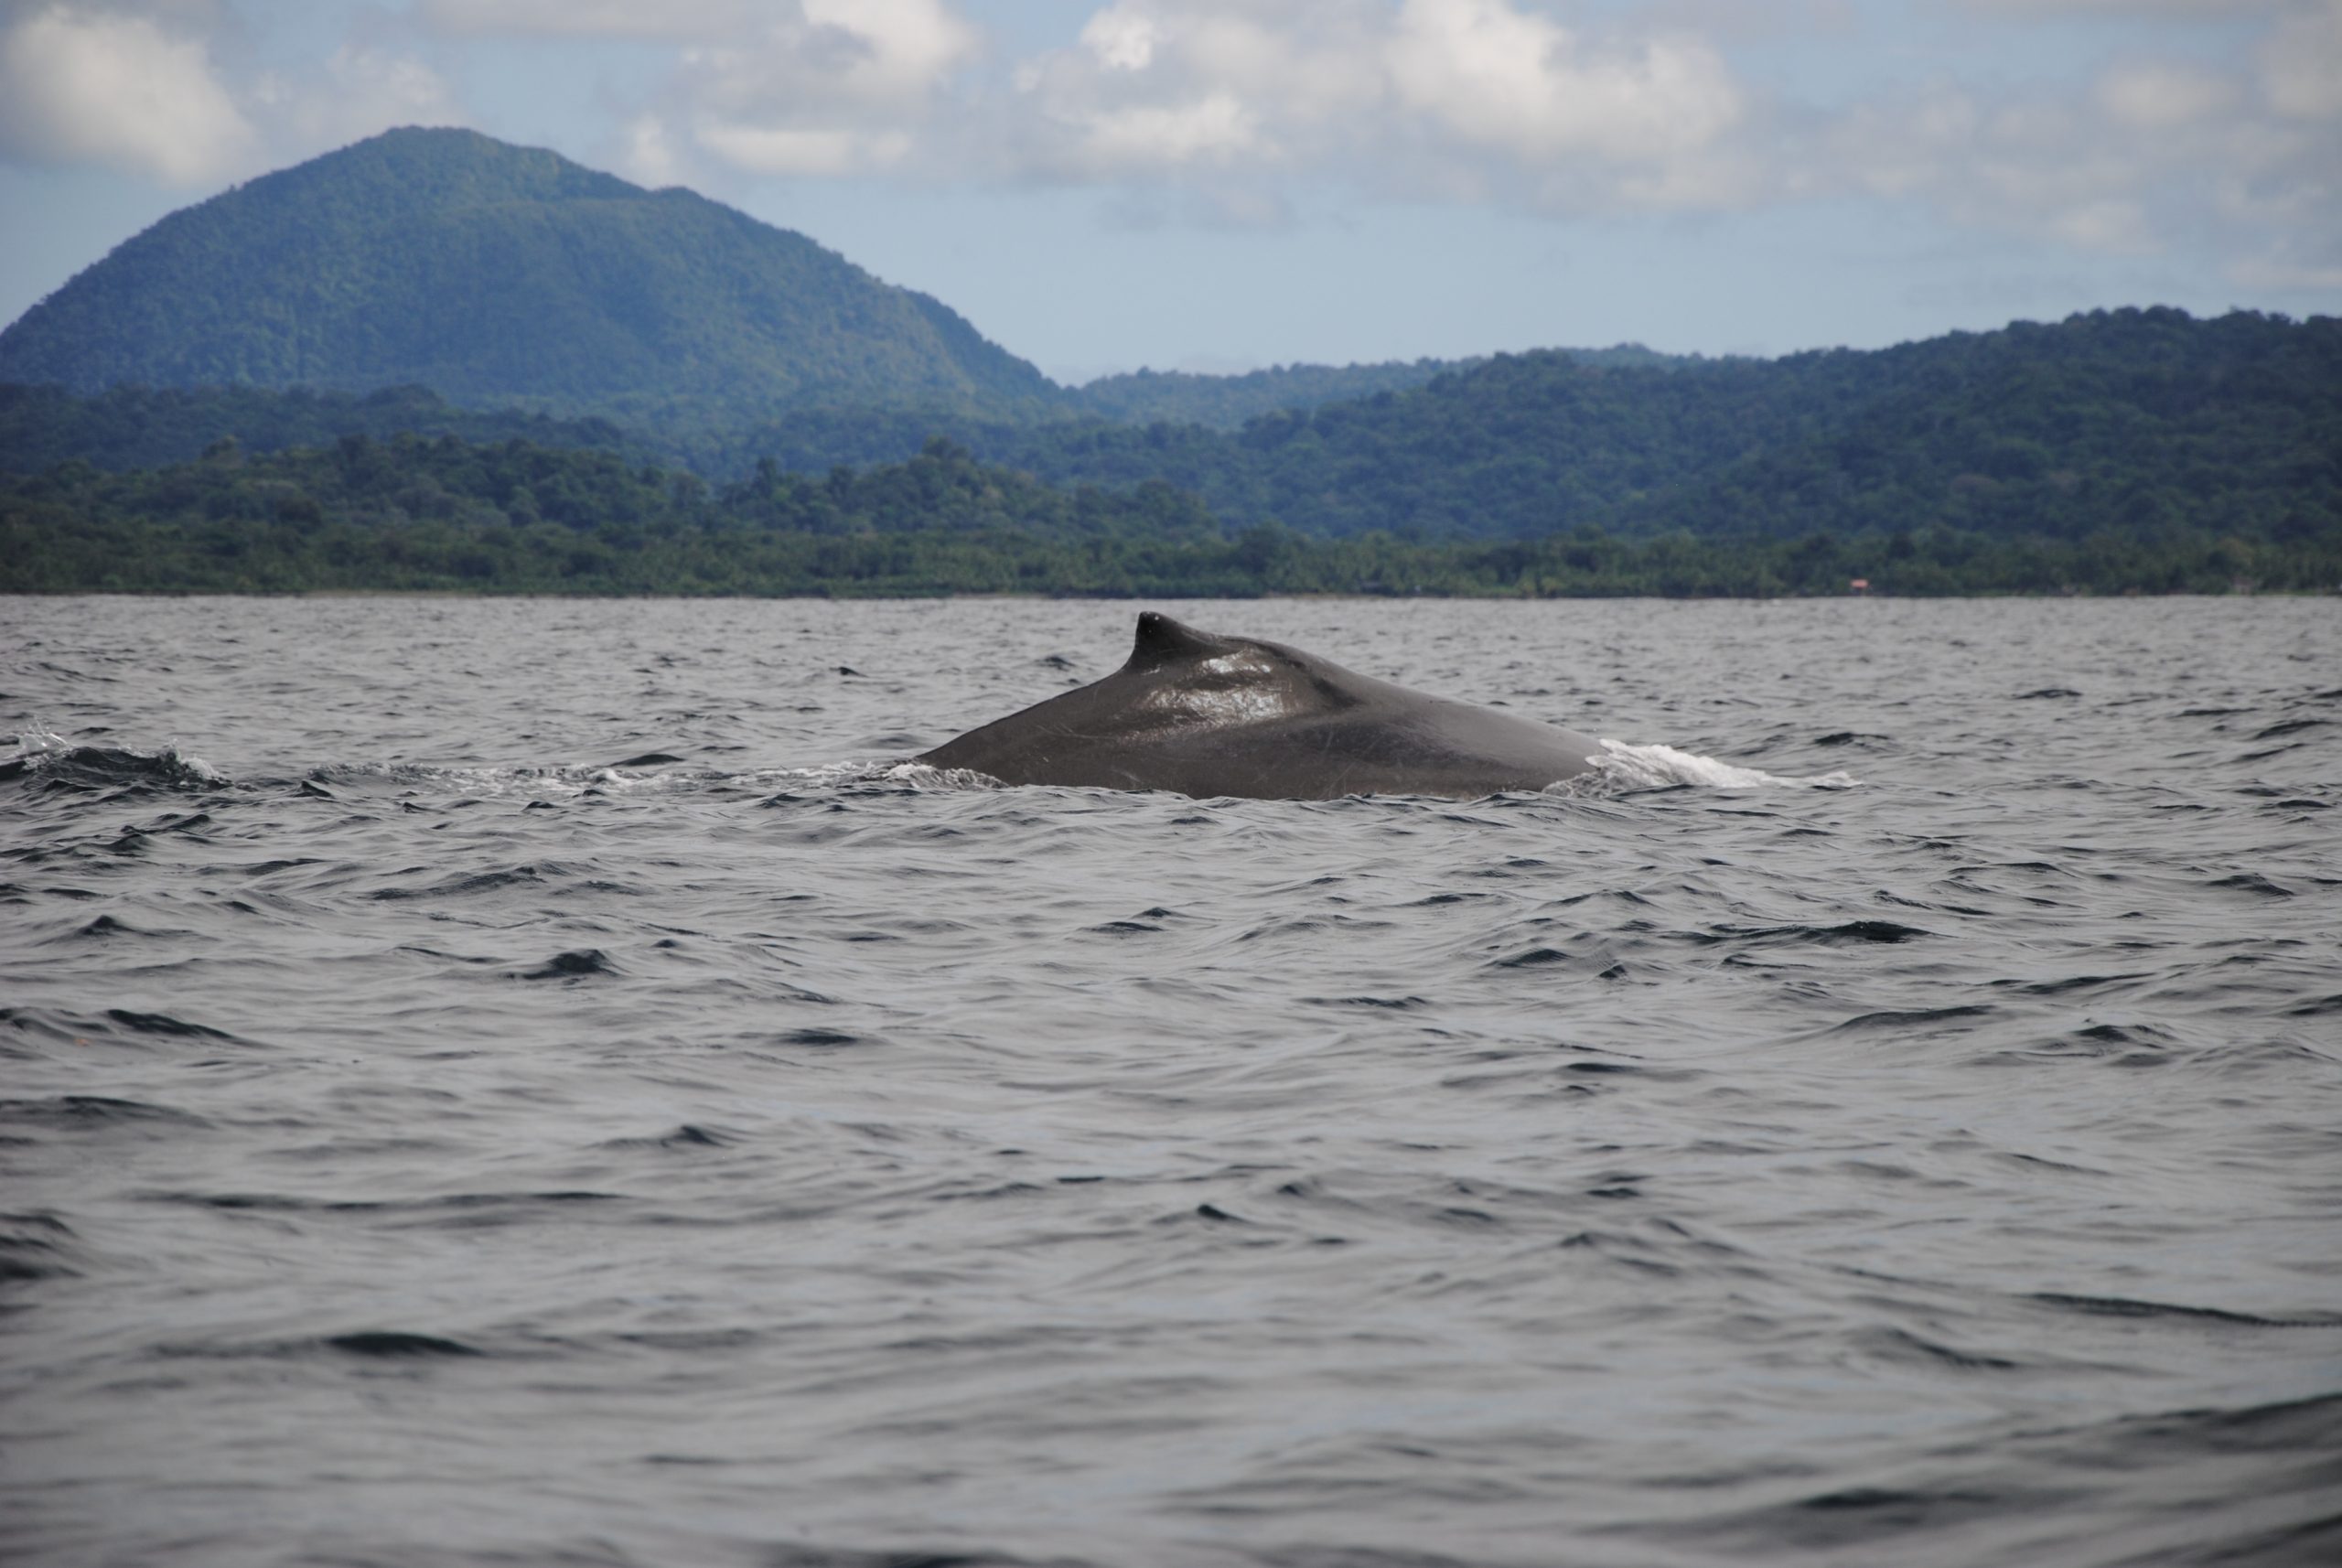 Whalewatching on Pacific Coast of Colombia, Choco